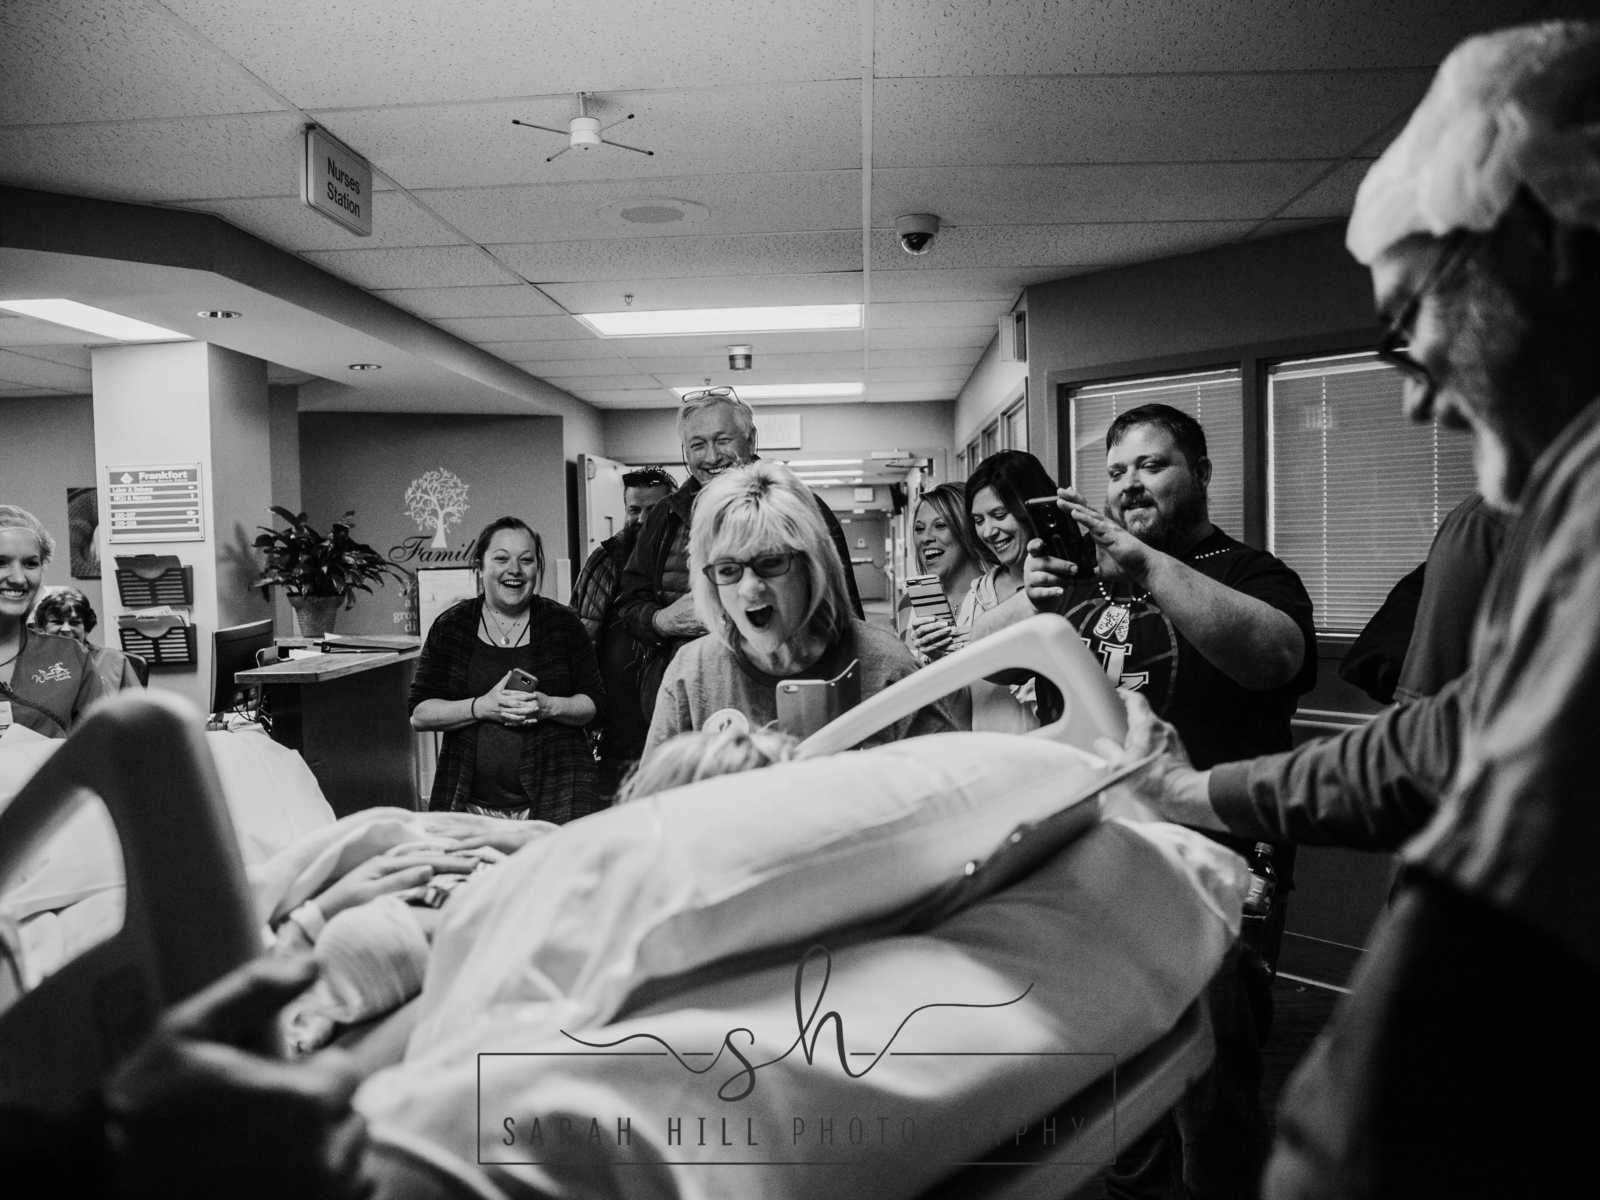 Woman who just had c-section is pushed down hospital hallway with newborn while crowd watches